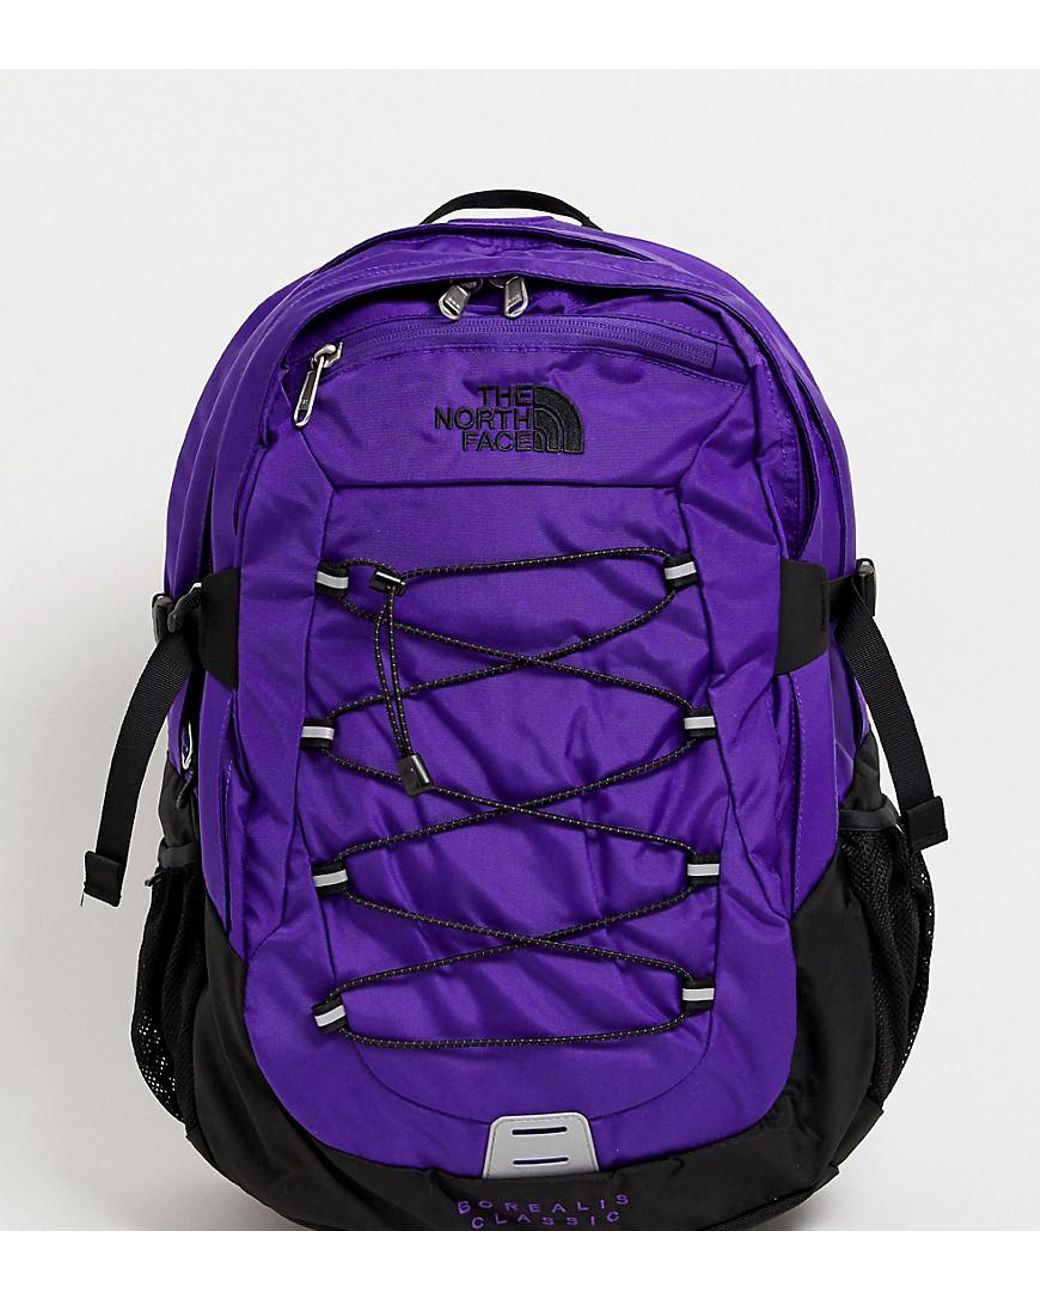 The North Face Synthetic North Face Borealis Classic Backpack Rucklsack  Laptop Bag in Purple | Lyst